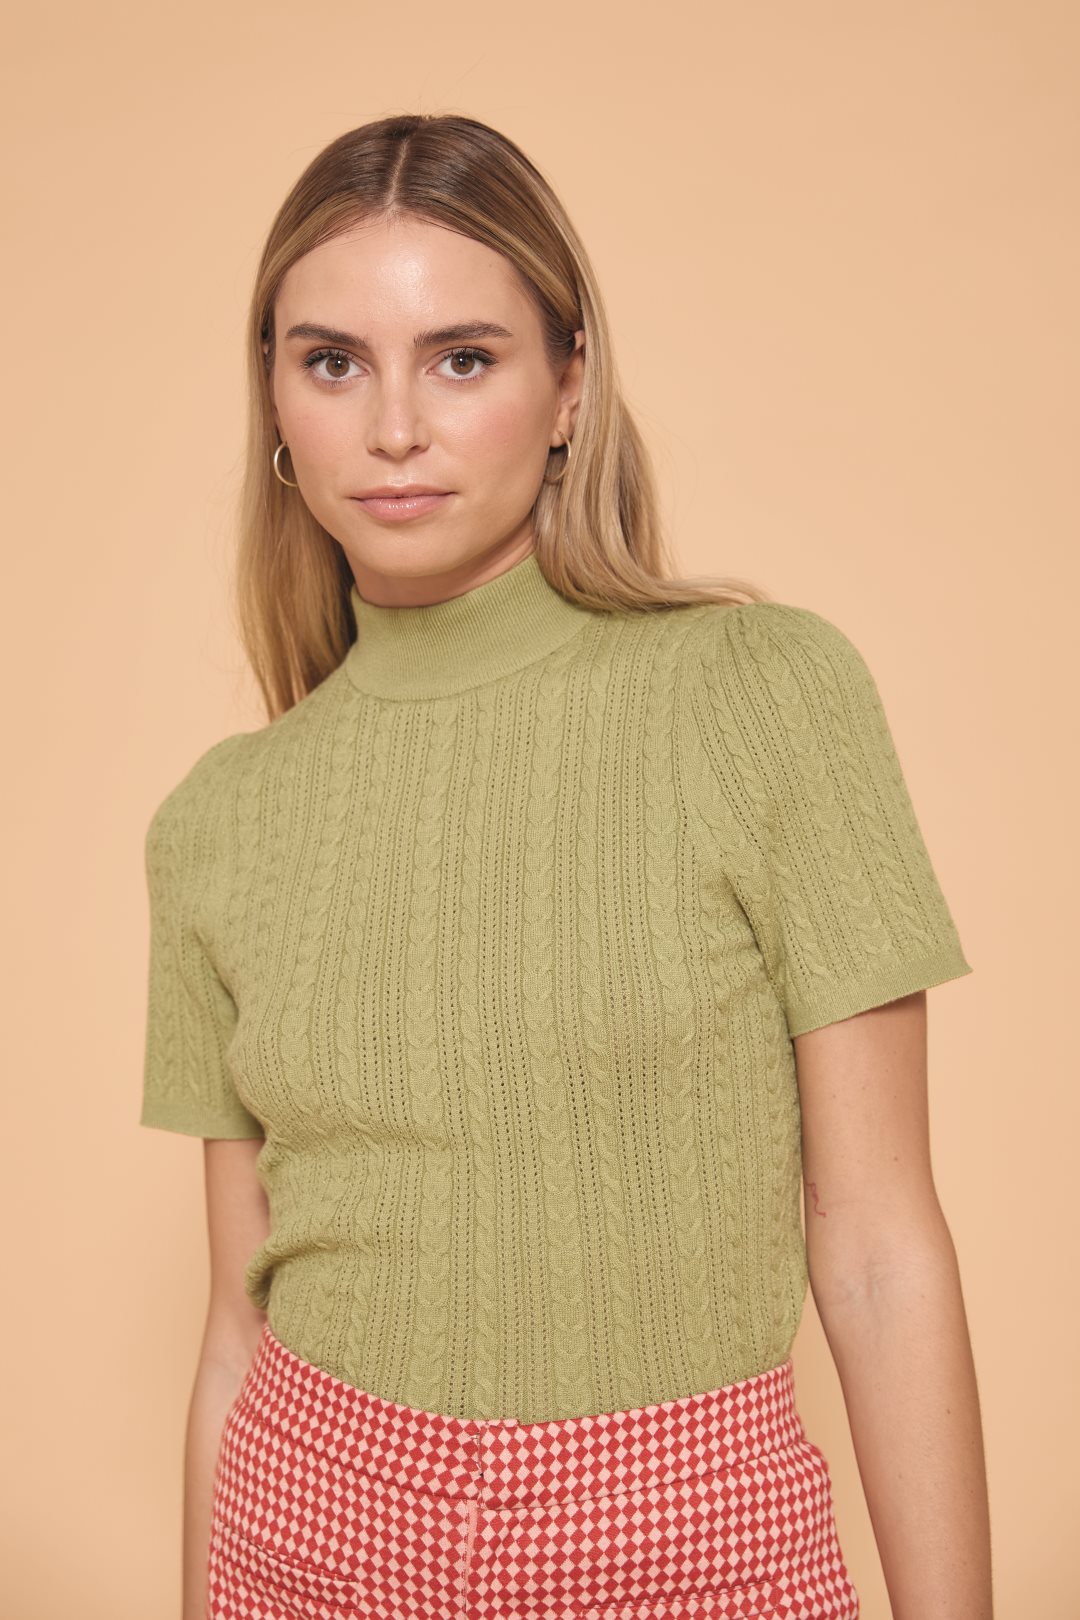 Cables knit sweater